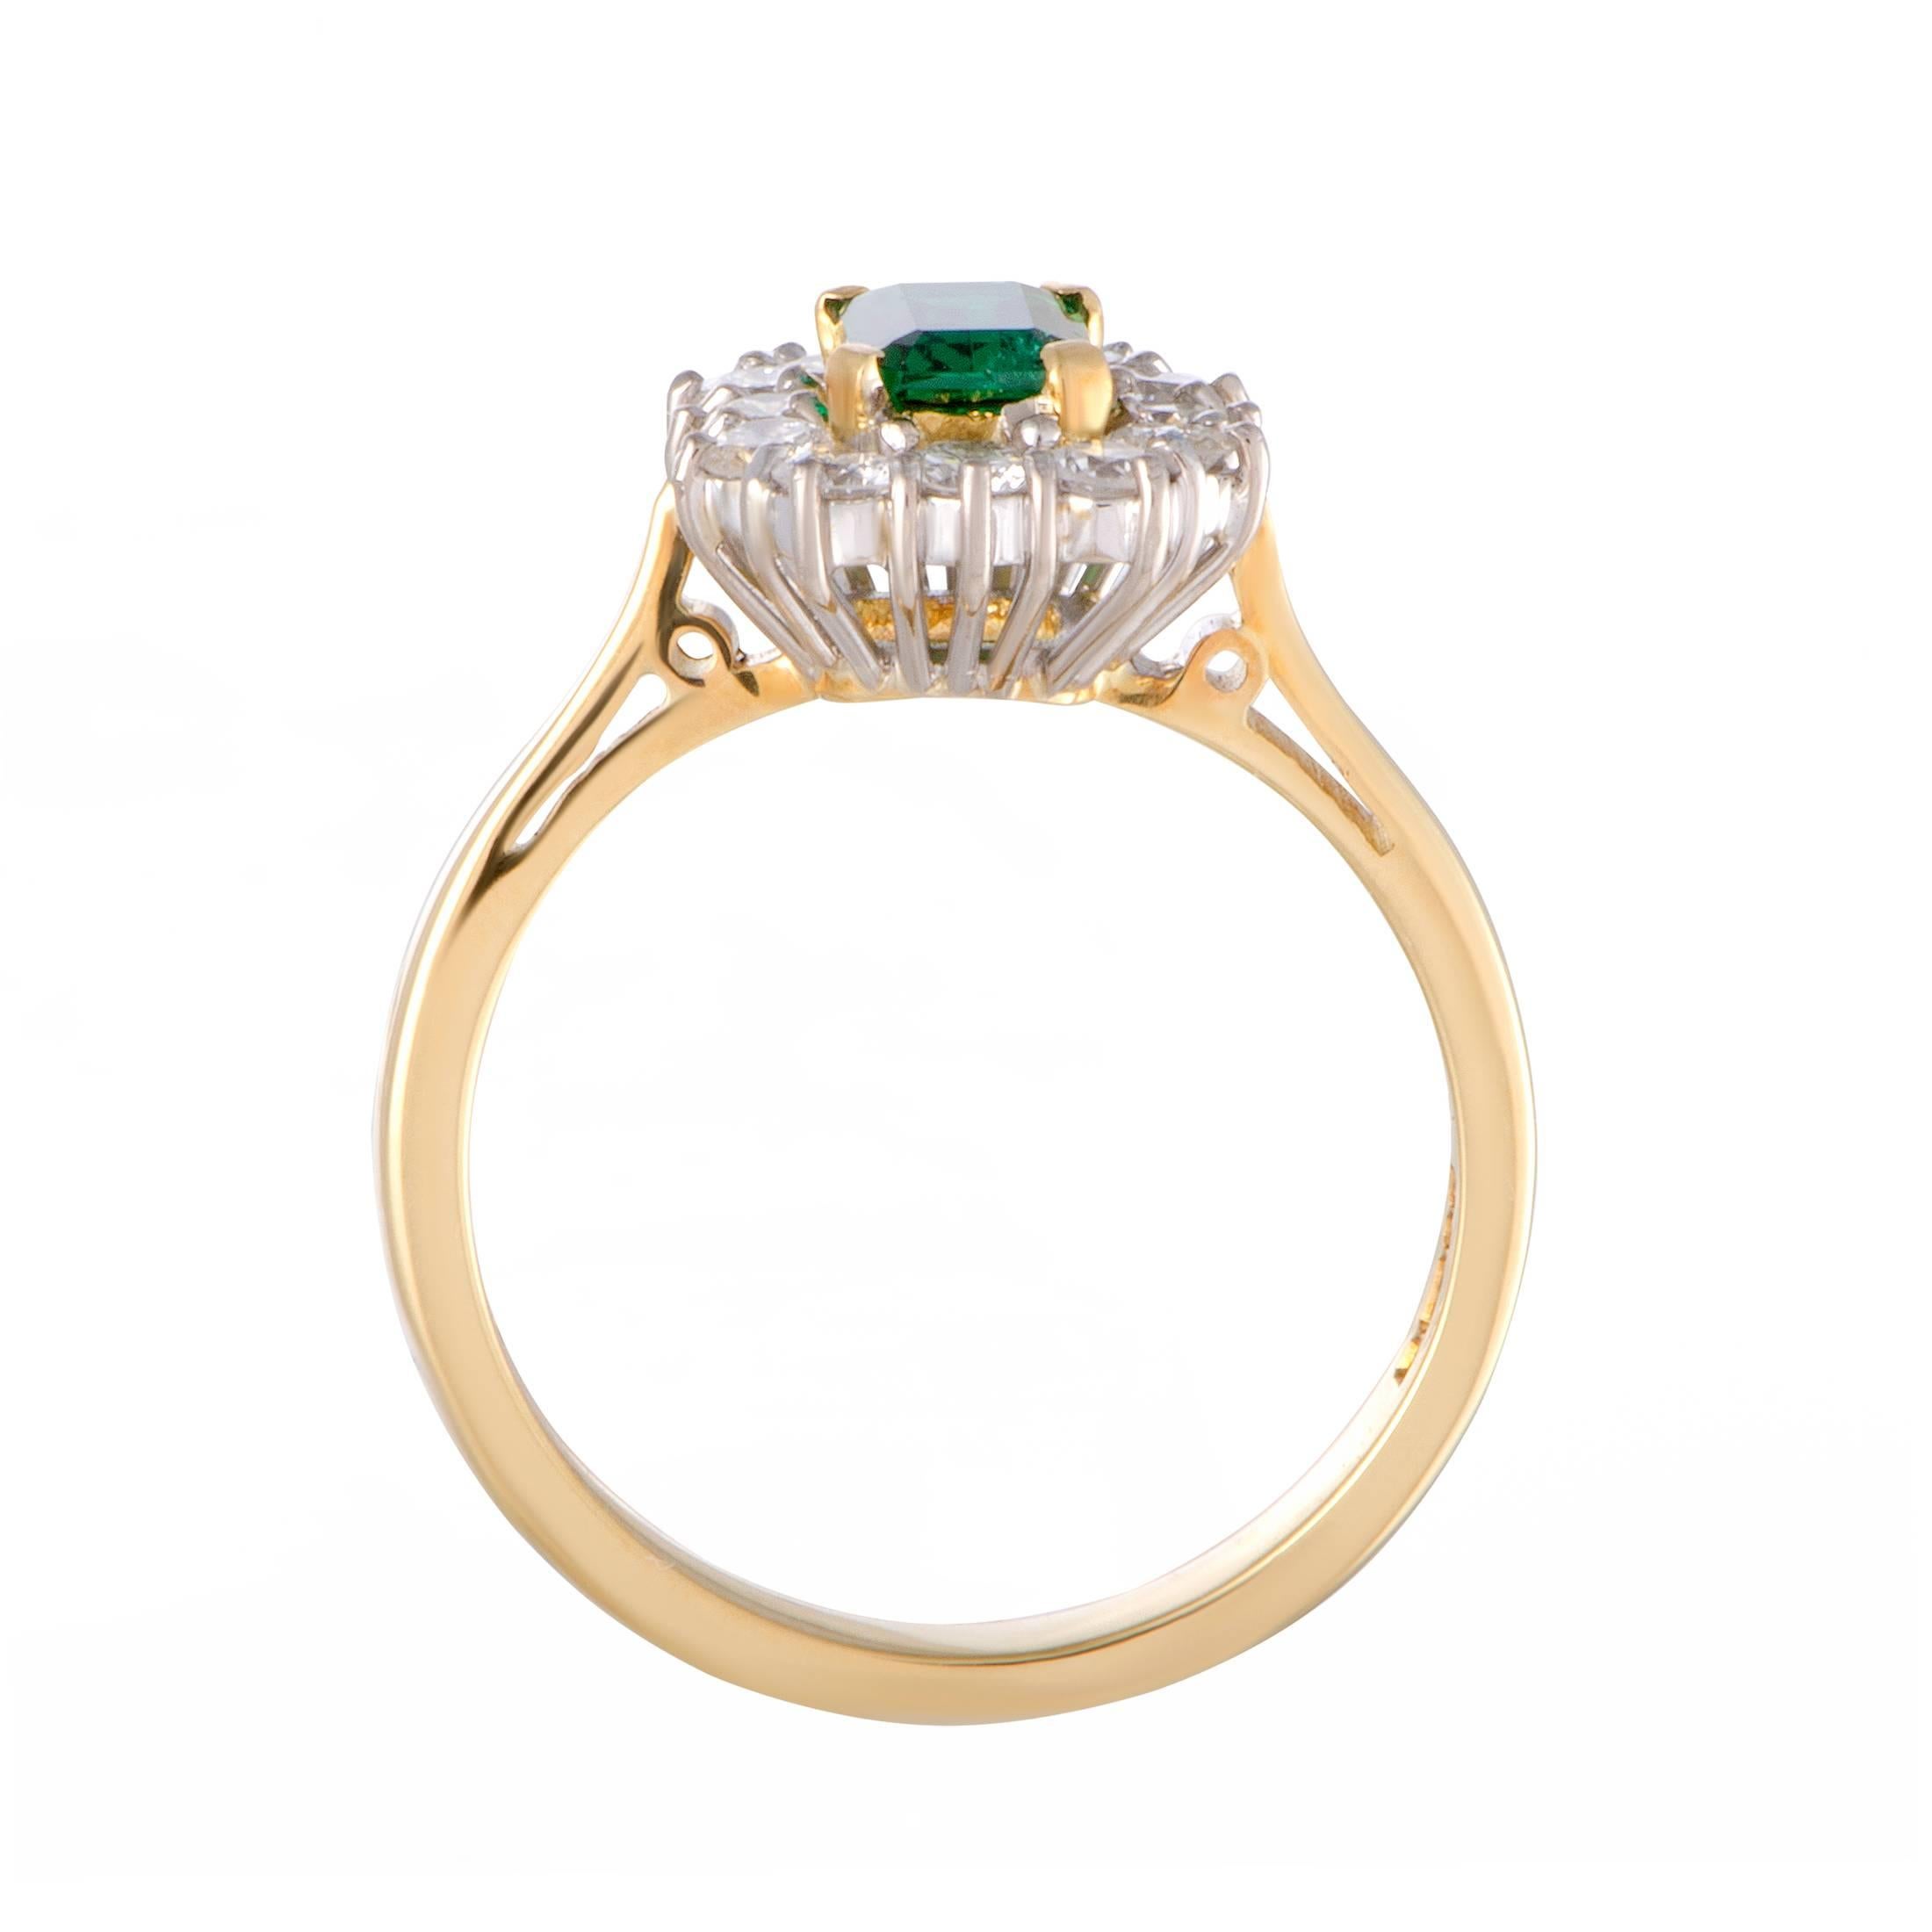 The very essence of elegance and excellence is embodied in this superb ring designed by Garrard that features an exceptionally refined design and dazzling décor. Crafted from 18K yellow and 18K white gold, the ring is set with an eye-catching